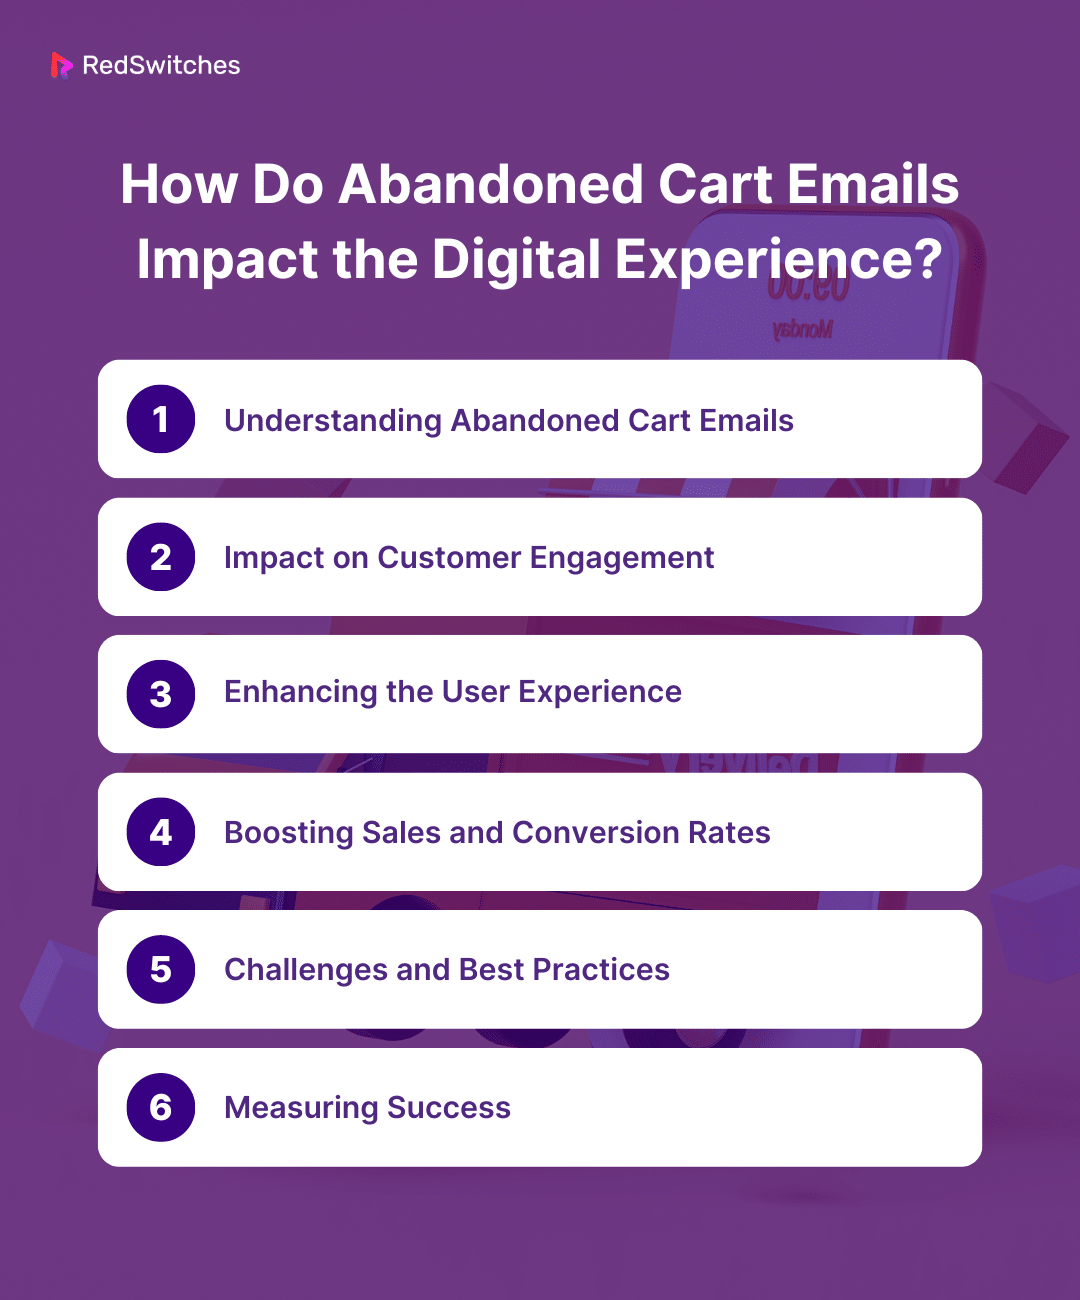 How Do Abandoned Cart Emails Impact the Digital Experience